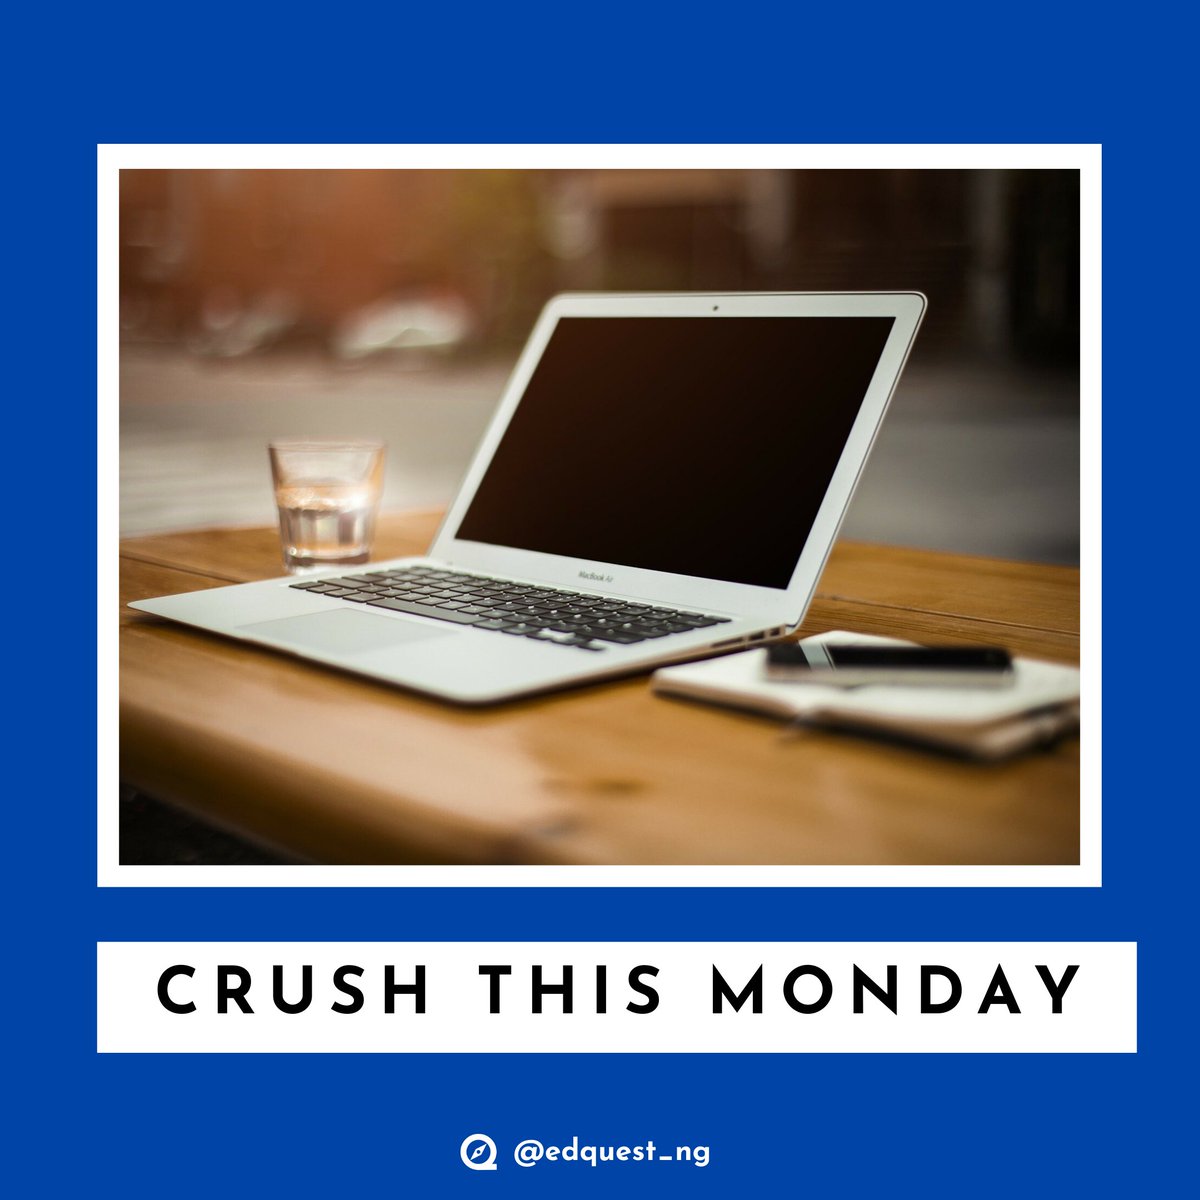 We are wishing a beautiful start to the week.
Go and crush those goals!

#MondayMotivation #EdQuest #LearnWithEdquest #Nigerian